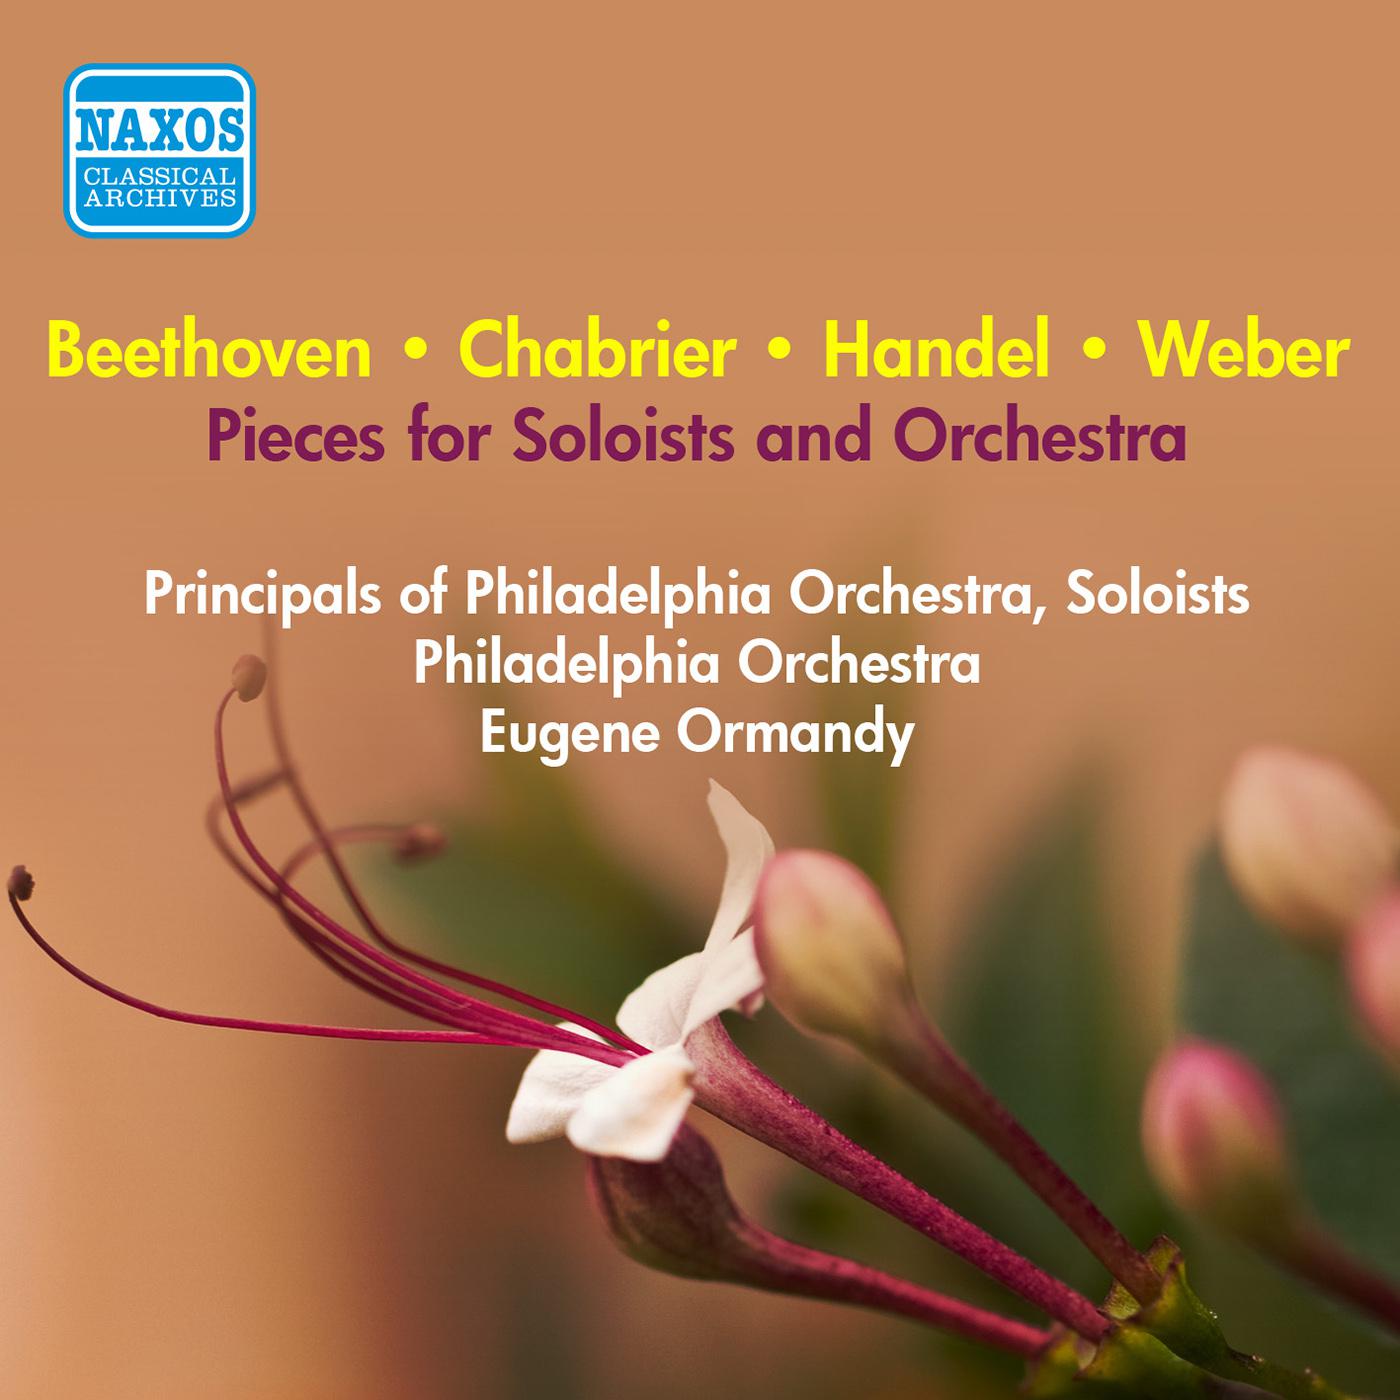 Pieces for Soloists and Orchestra - HANDEL, G.F. / BEETHOVEN, L. / WEBER, C.M. / CHABRIER, E. (Principals of Philadelphia Orchestra, Ormandy) (1952)